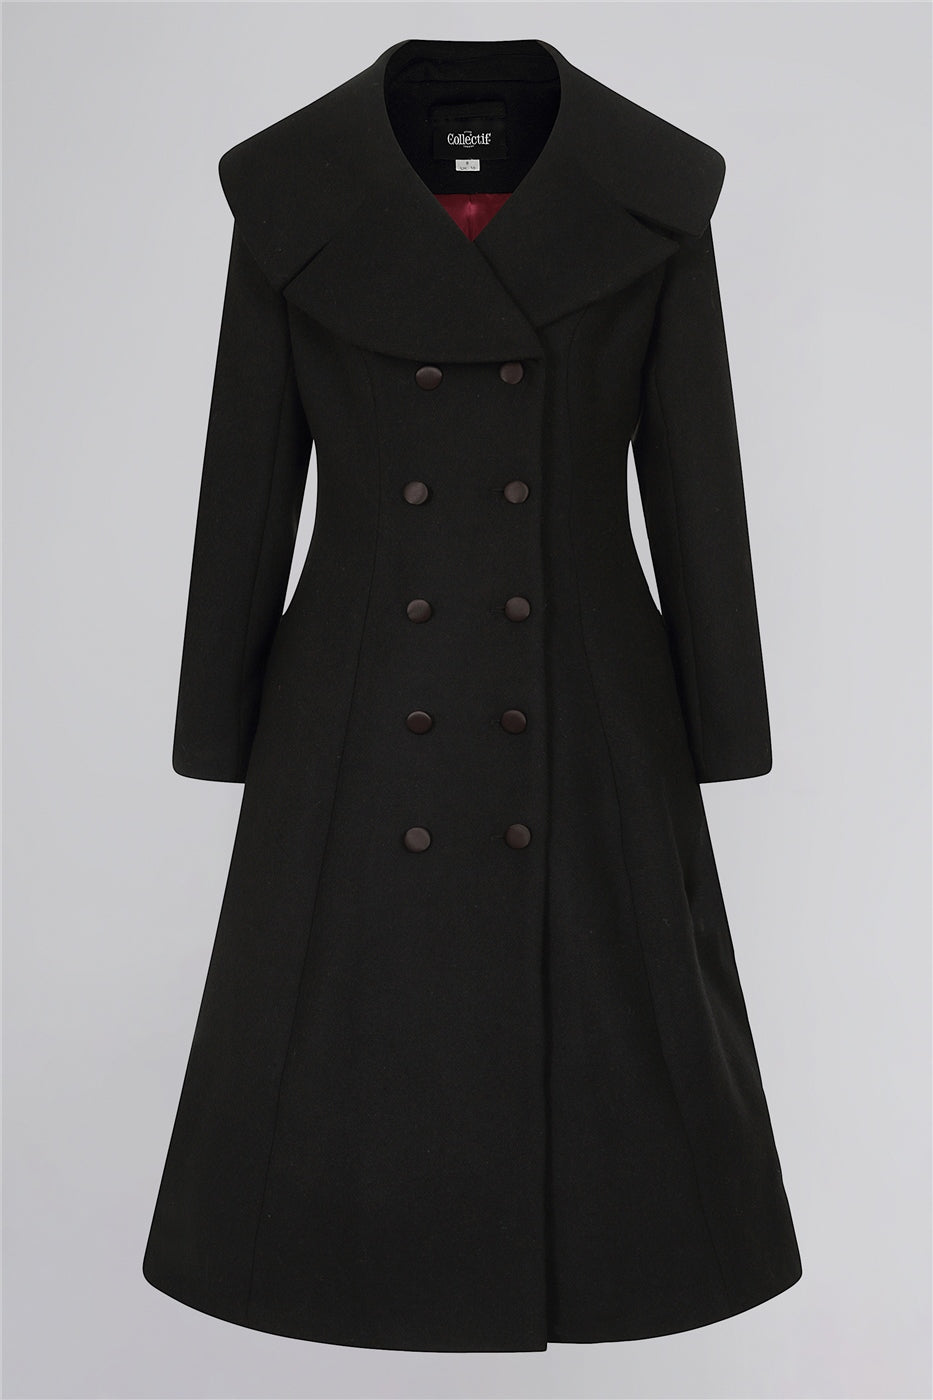 Eileean Coat by Collectif